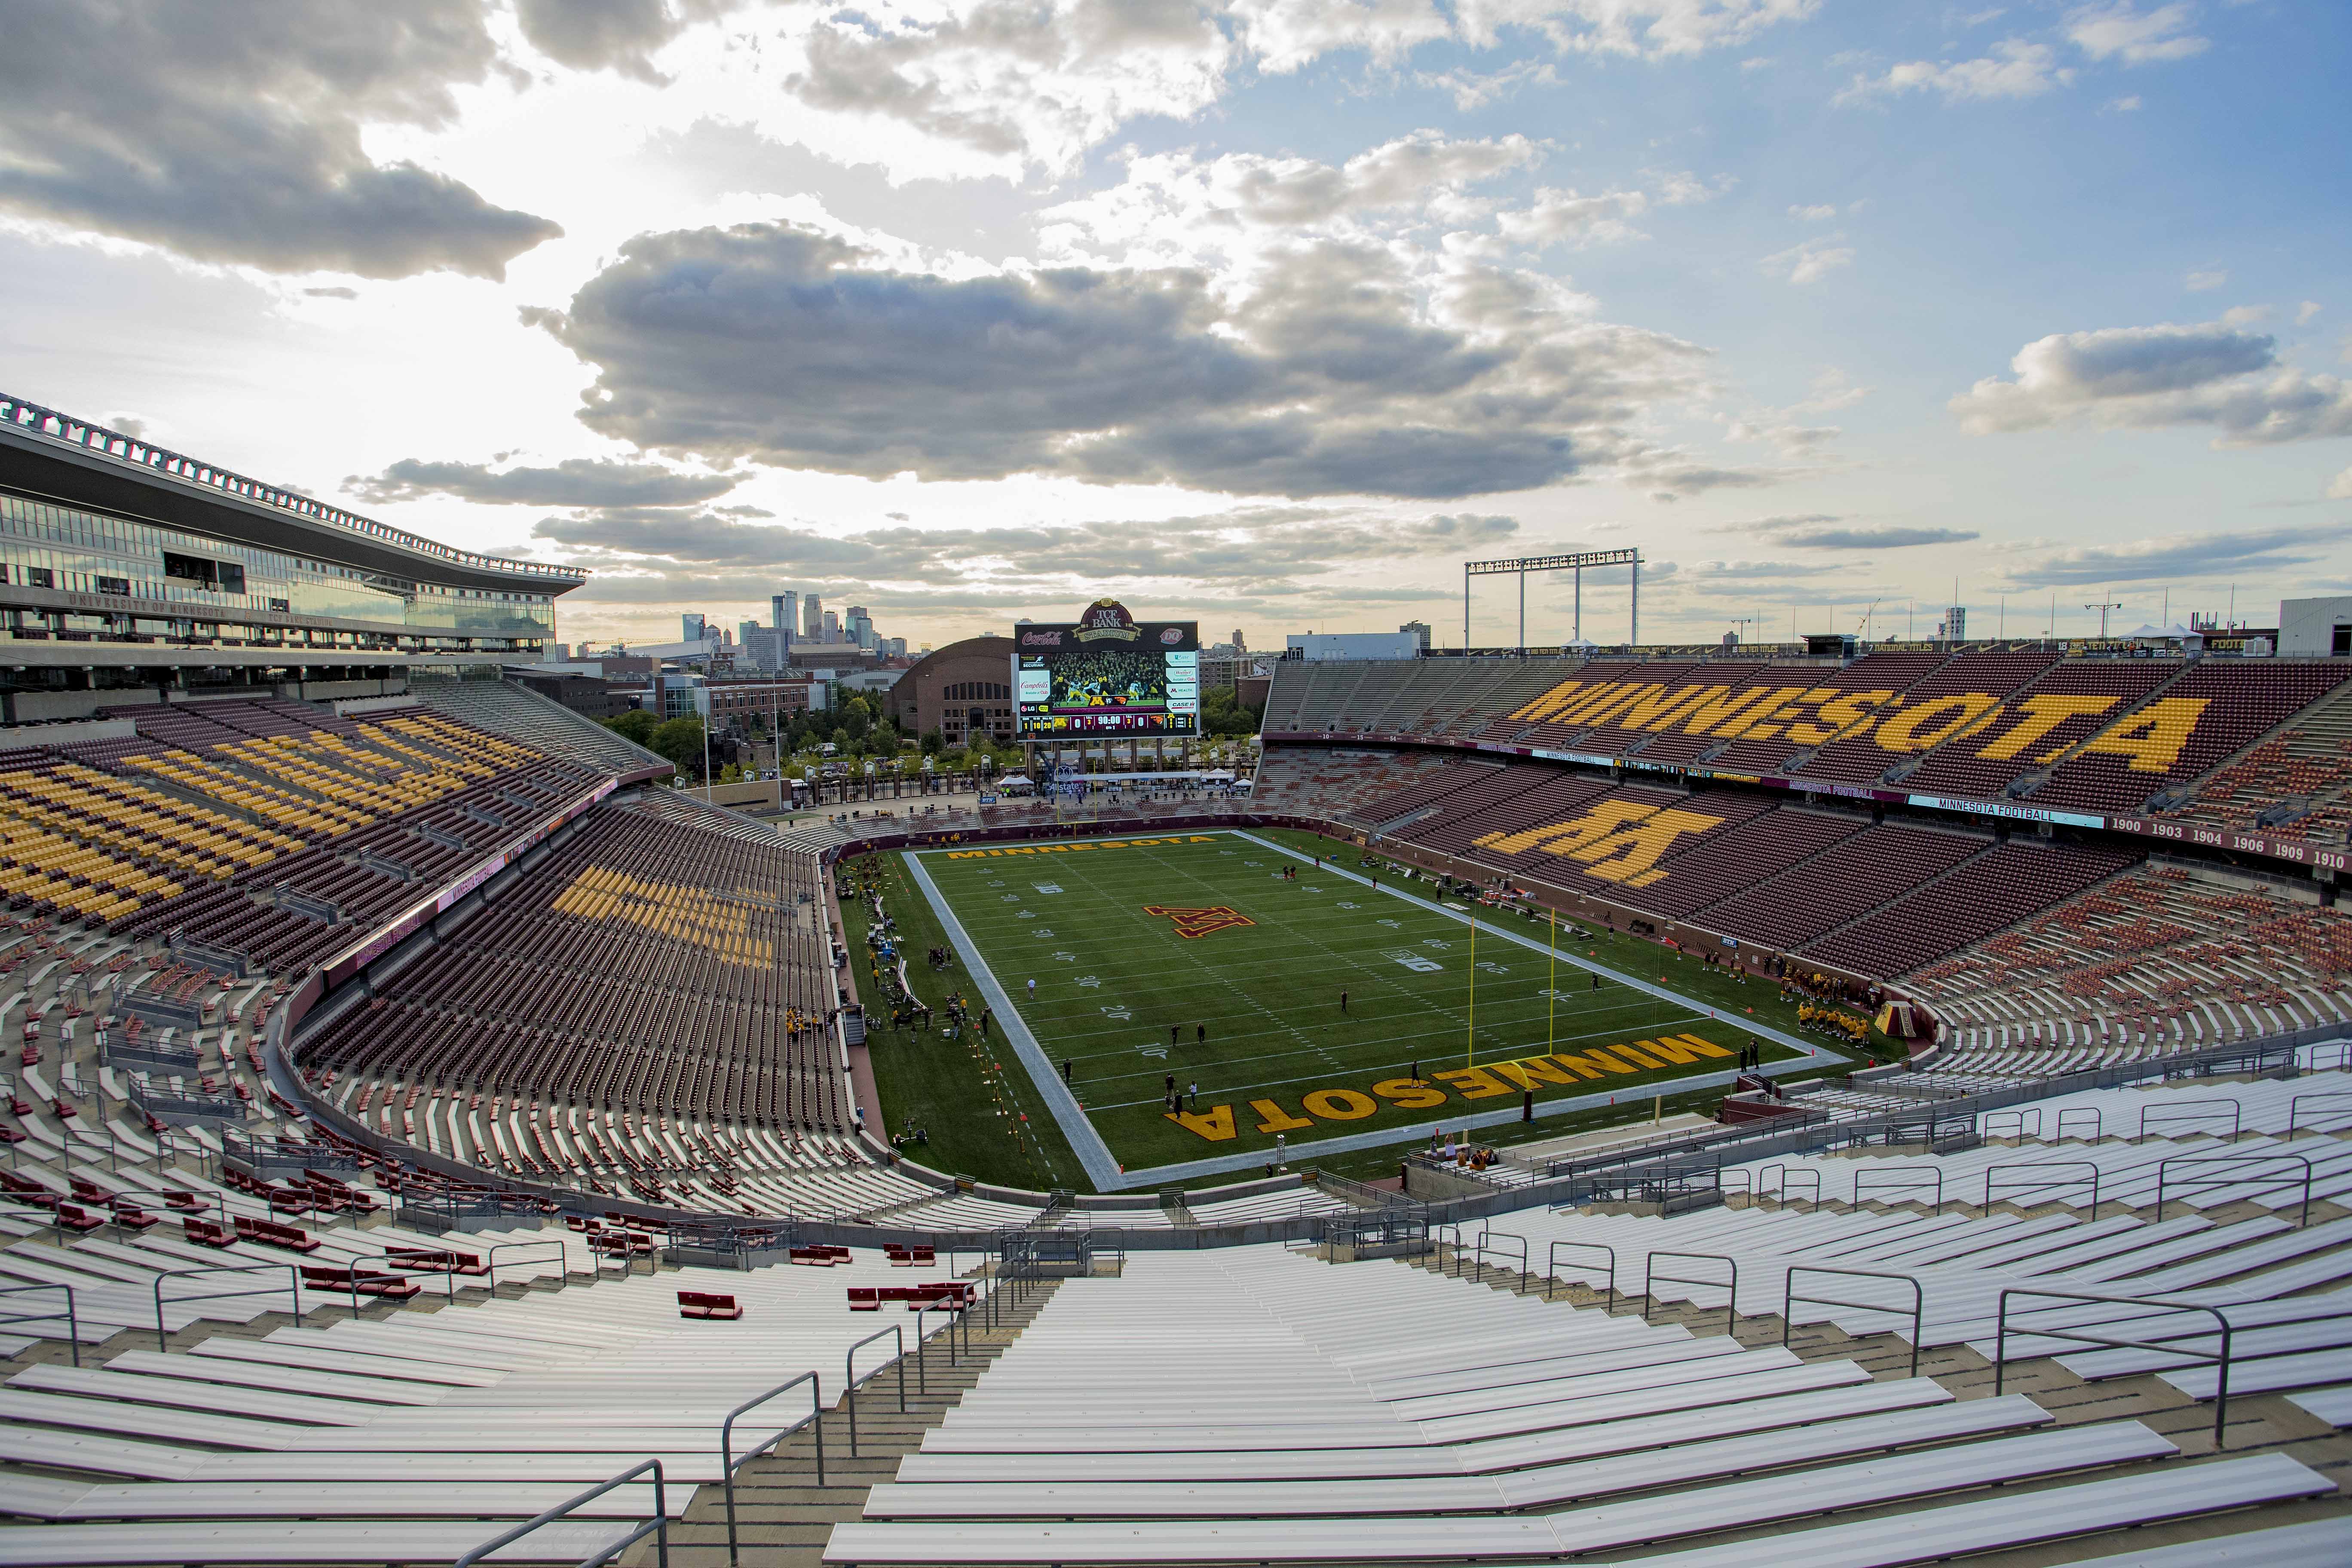 LOOK: Significant progress made on turf replacement at Minnesota's TCF